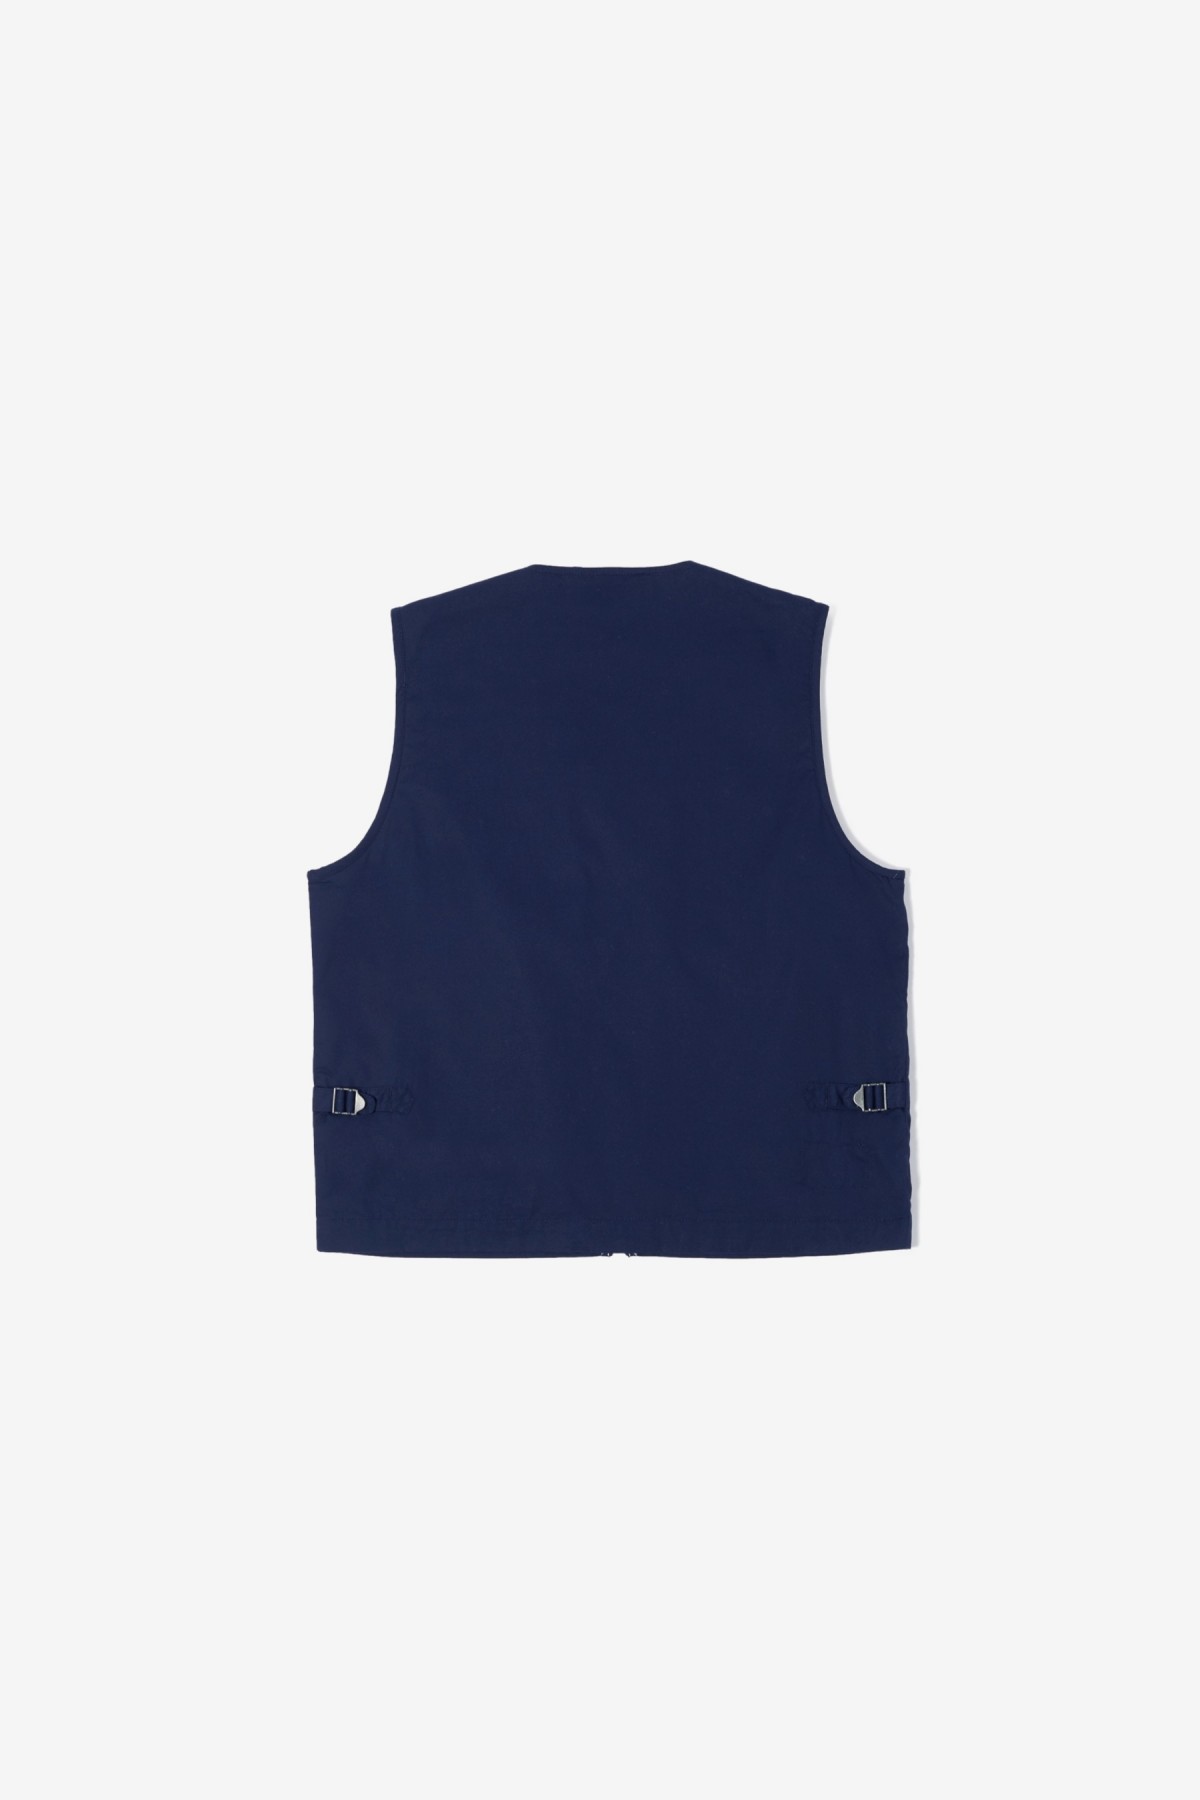 Universal Works Photographers Gilet in Navy